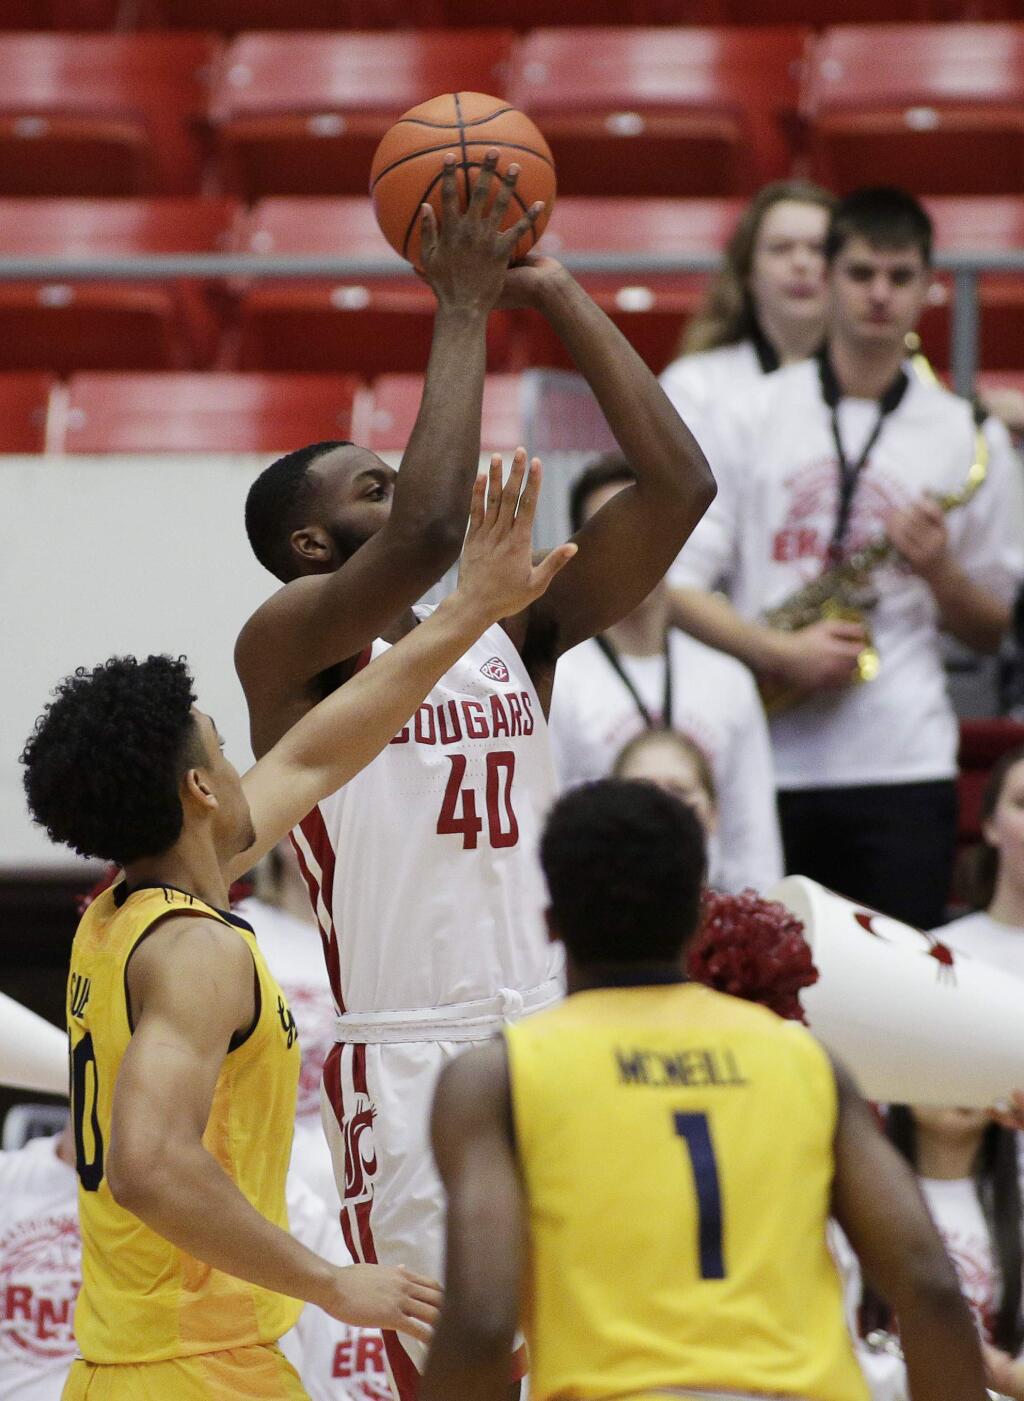 Washington State guard Kwinton Hinson, center, shoots against California forward Justice Sueing, left, during the first half of an NCAA college basketball game in Pullman, Wash., Saturday, Jan. 13, 2018. (AP Photo/Young Kwak)